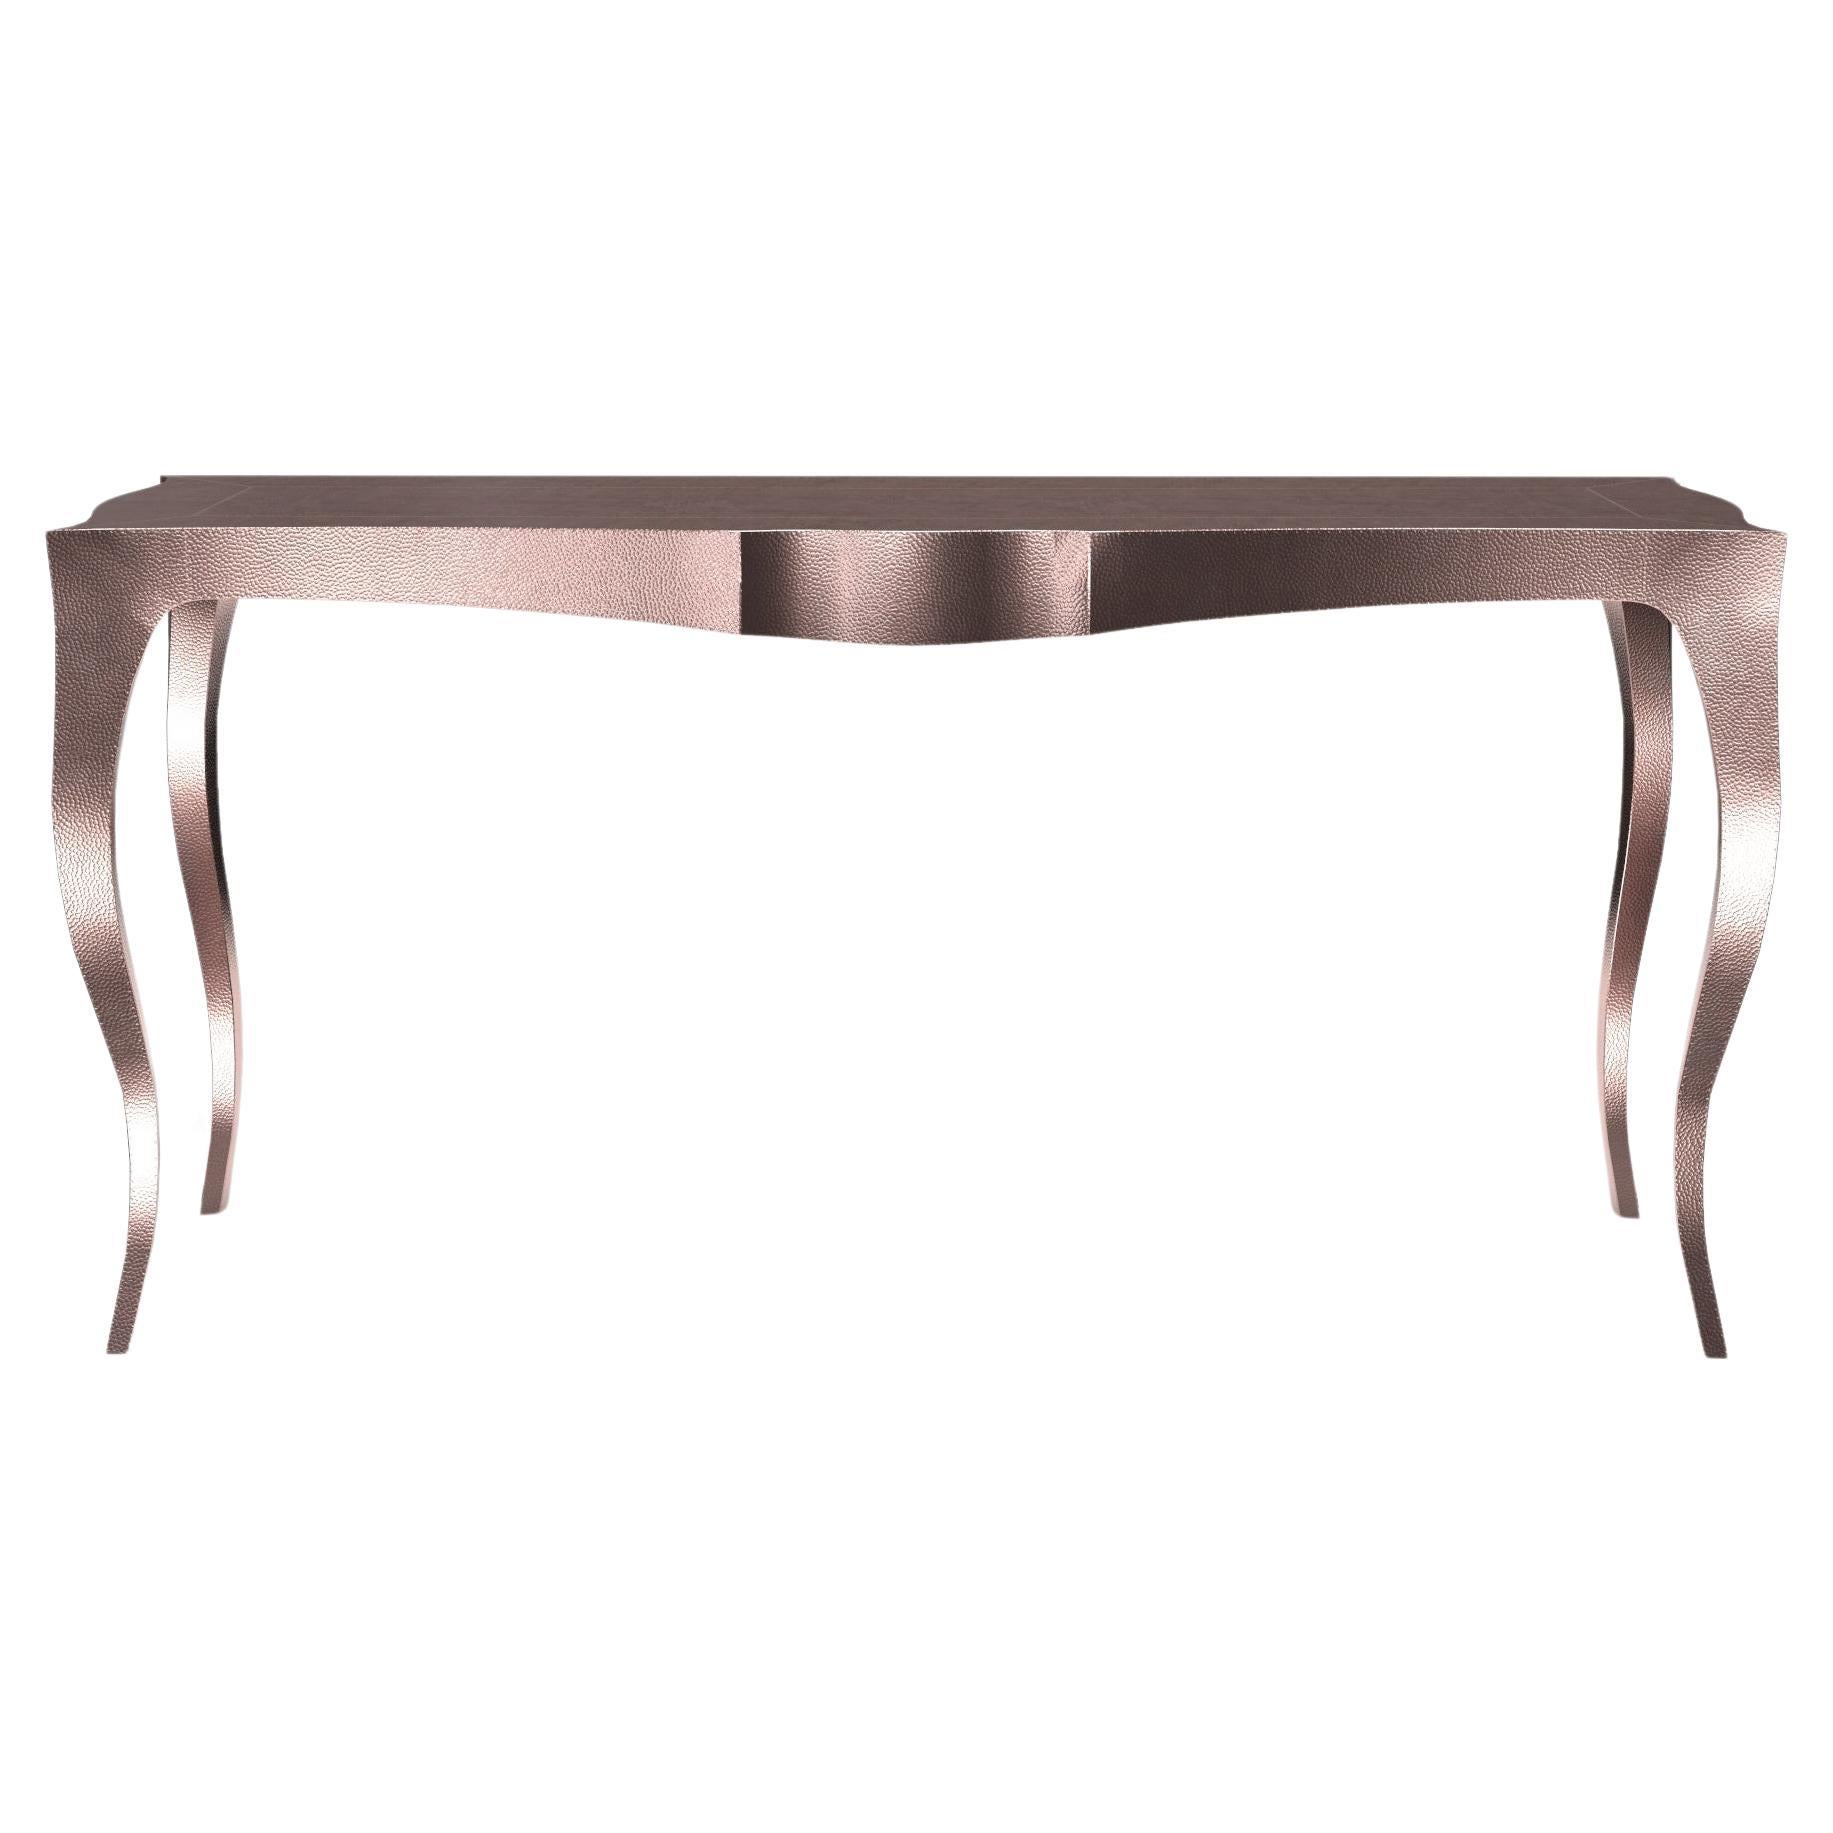 Louise Console Art Deco Desks and Writing Tables Mid. Hammered Copper 